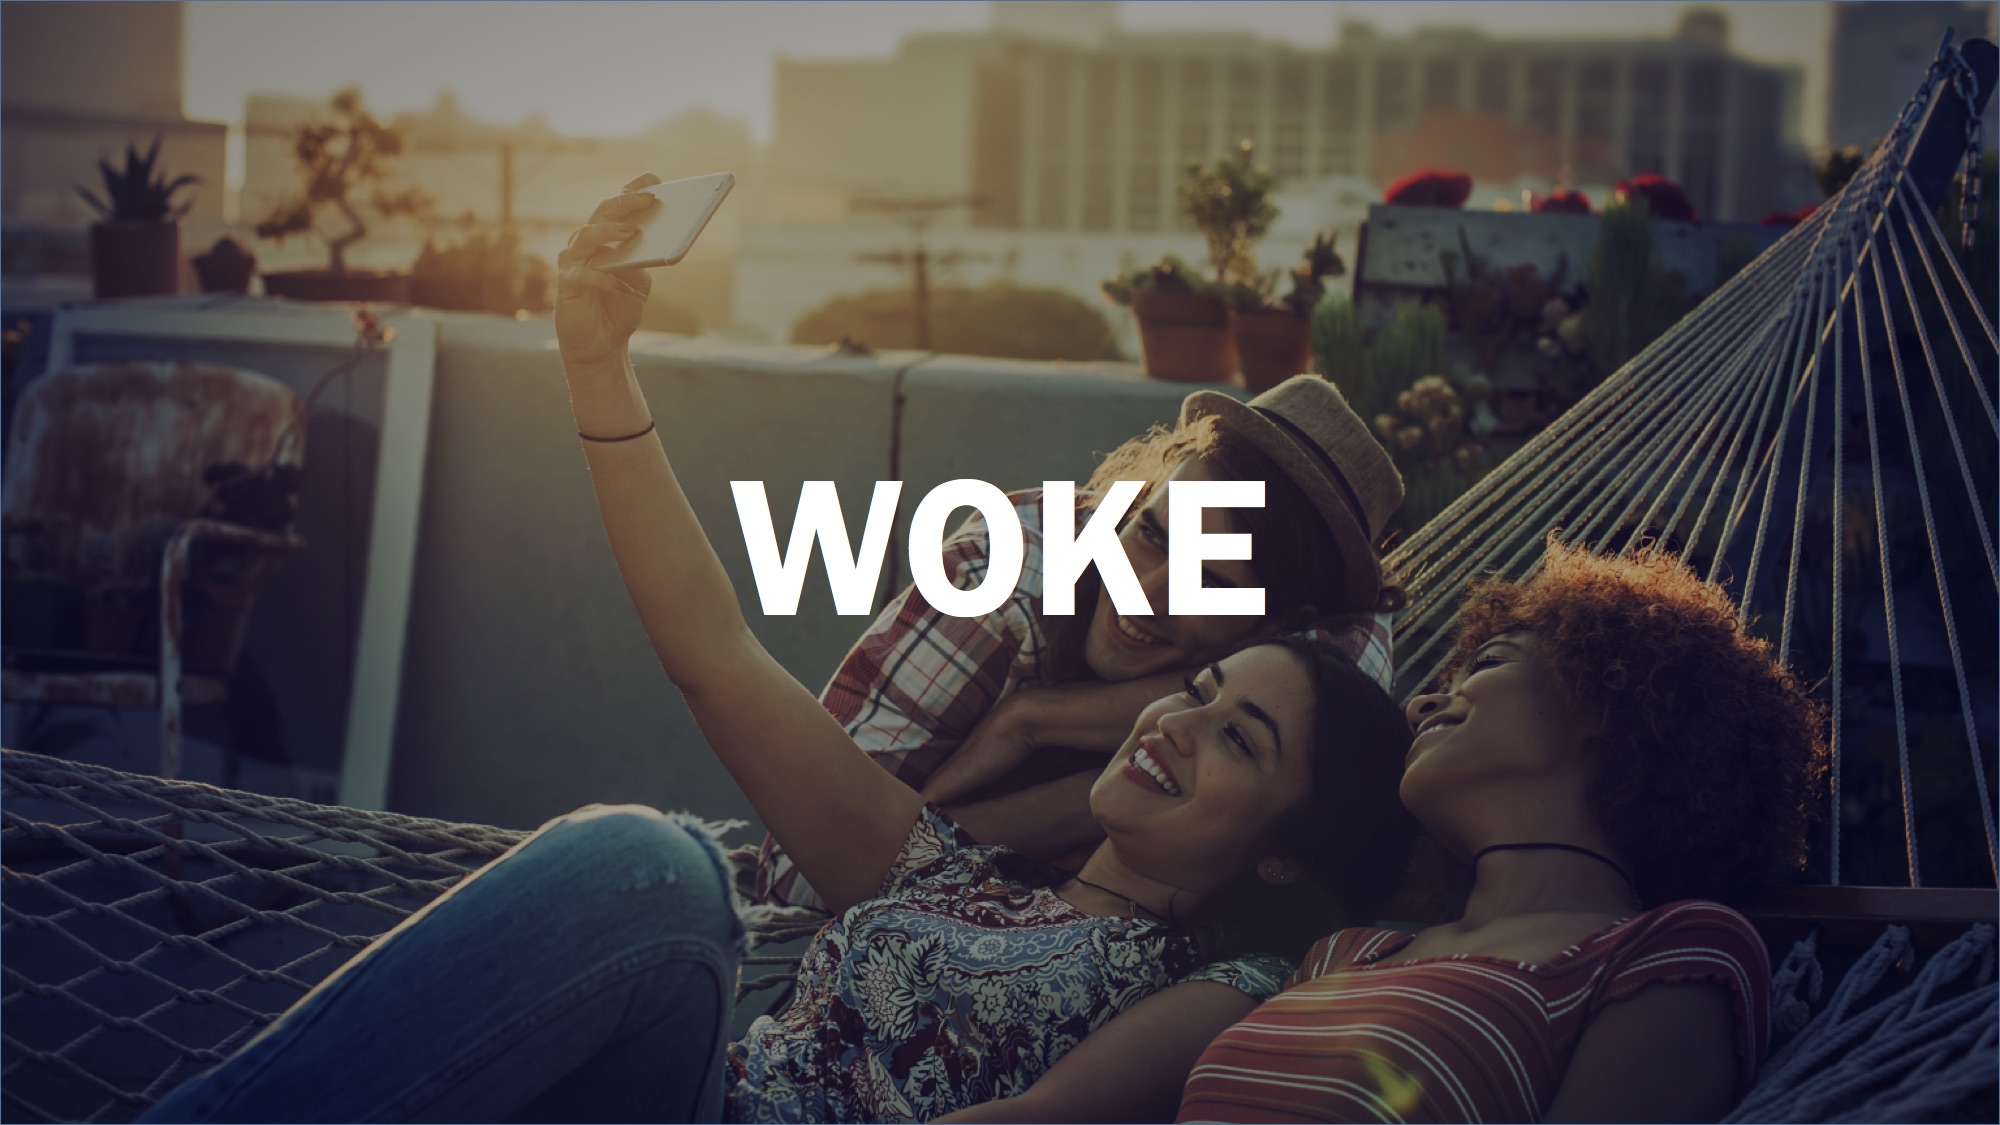 How to use 'woke' and other popular Millennial slang terms